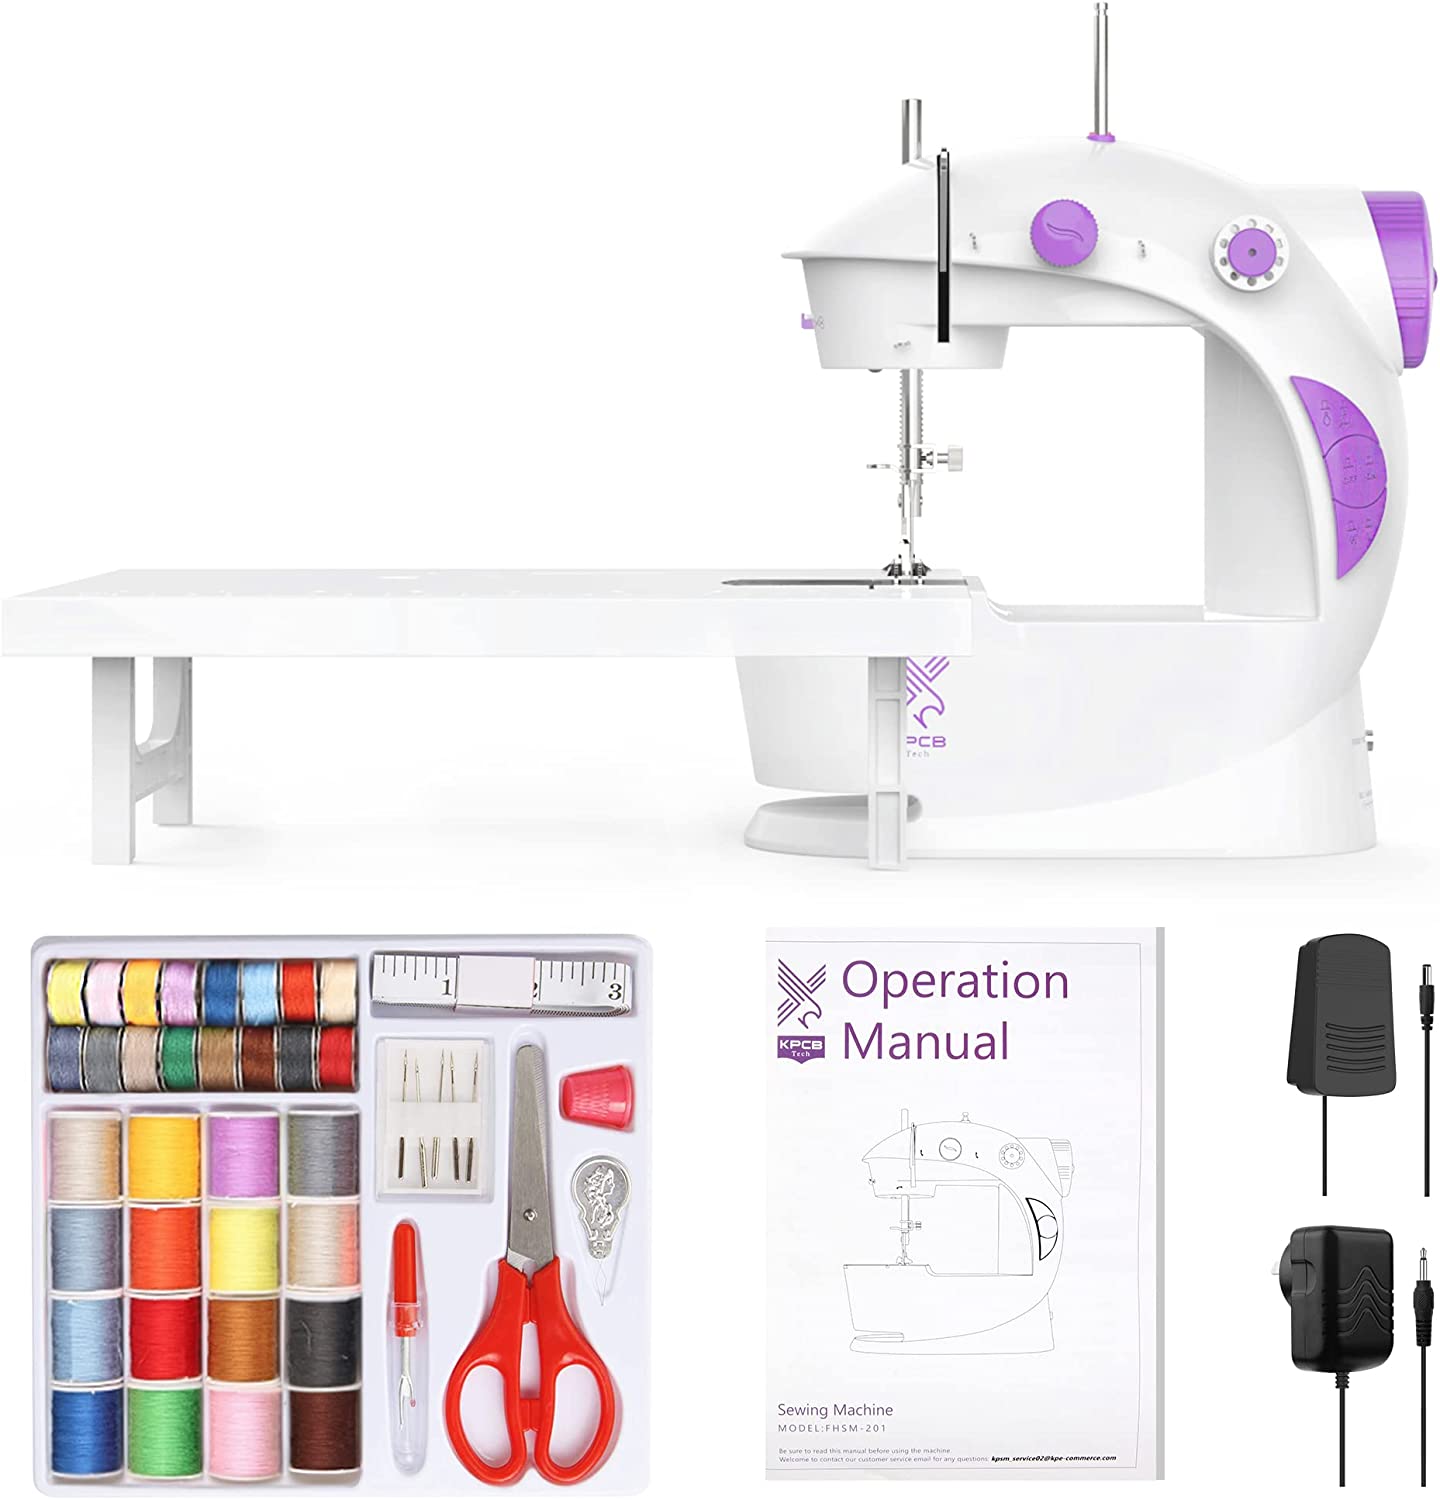 Sewing Extension Table Measurements Sizes and Comparisons